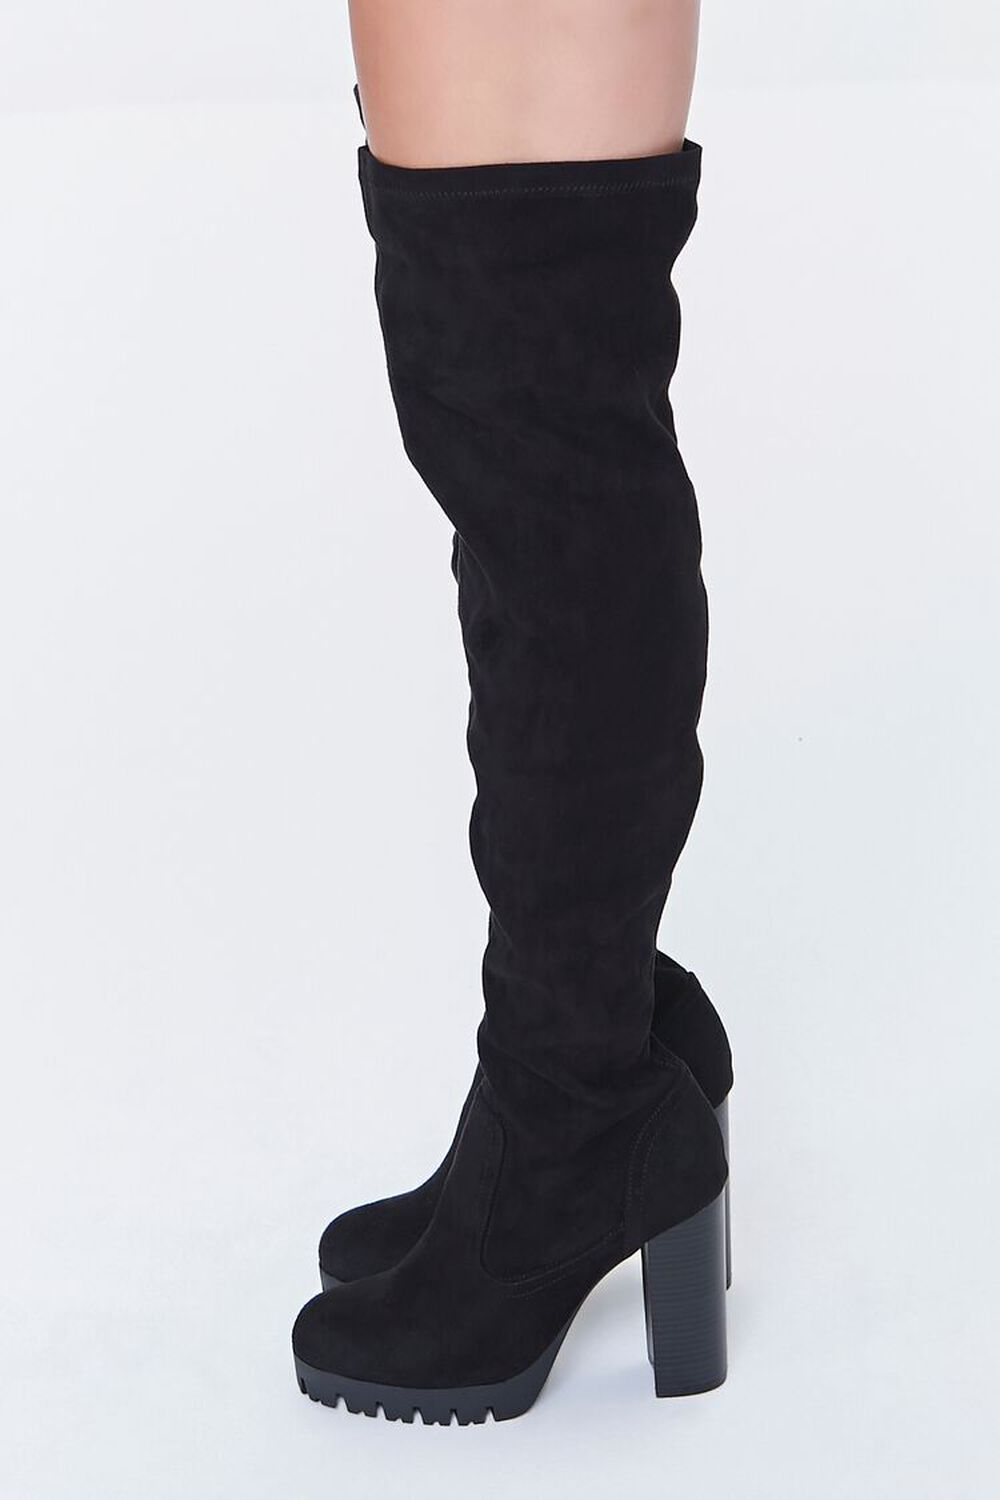 BLACK Faux Suede Over-the-Knee Boots, image 2